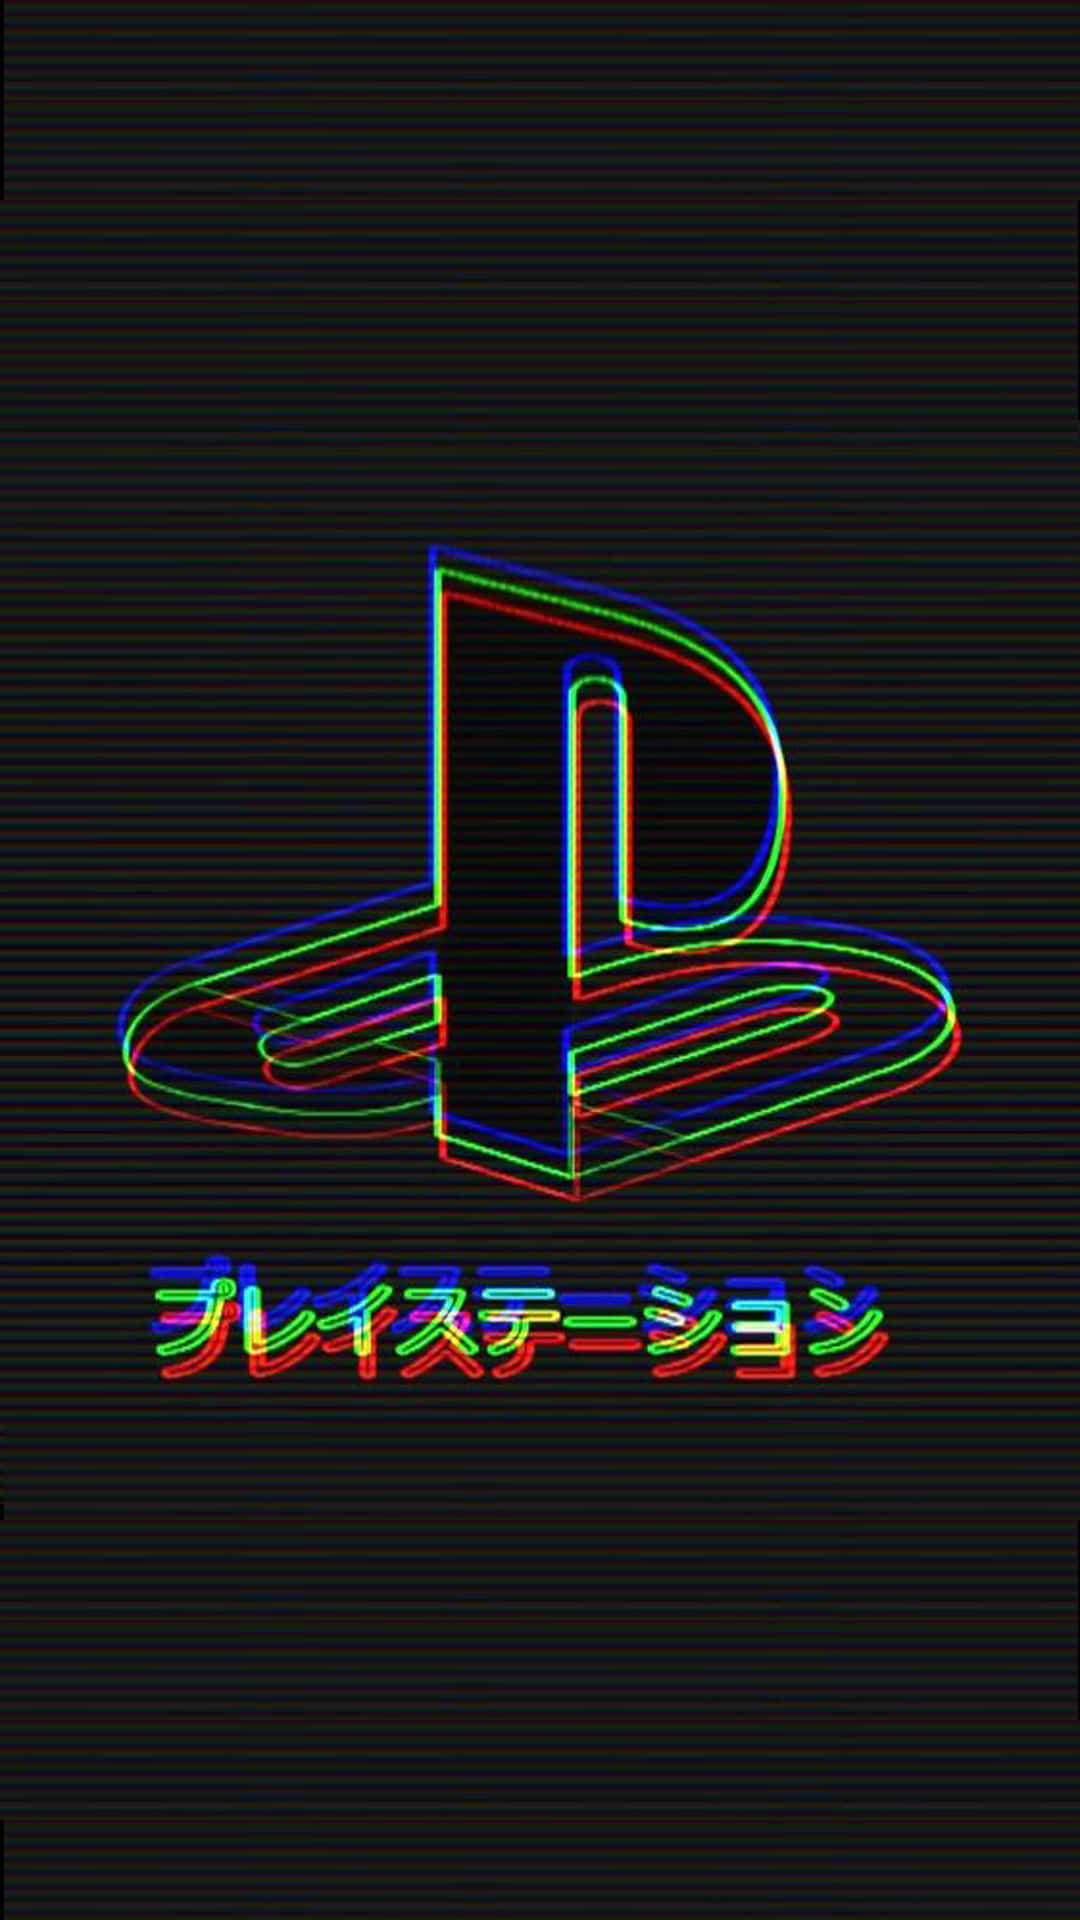 A Playstation Logo With A Rainbow Background Wallpaper